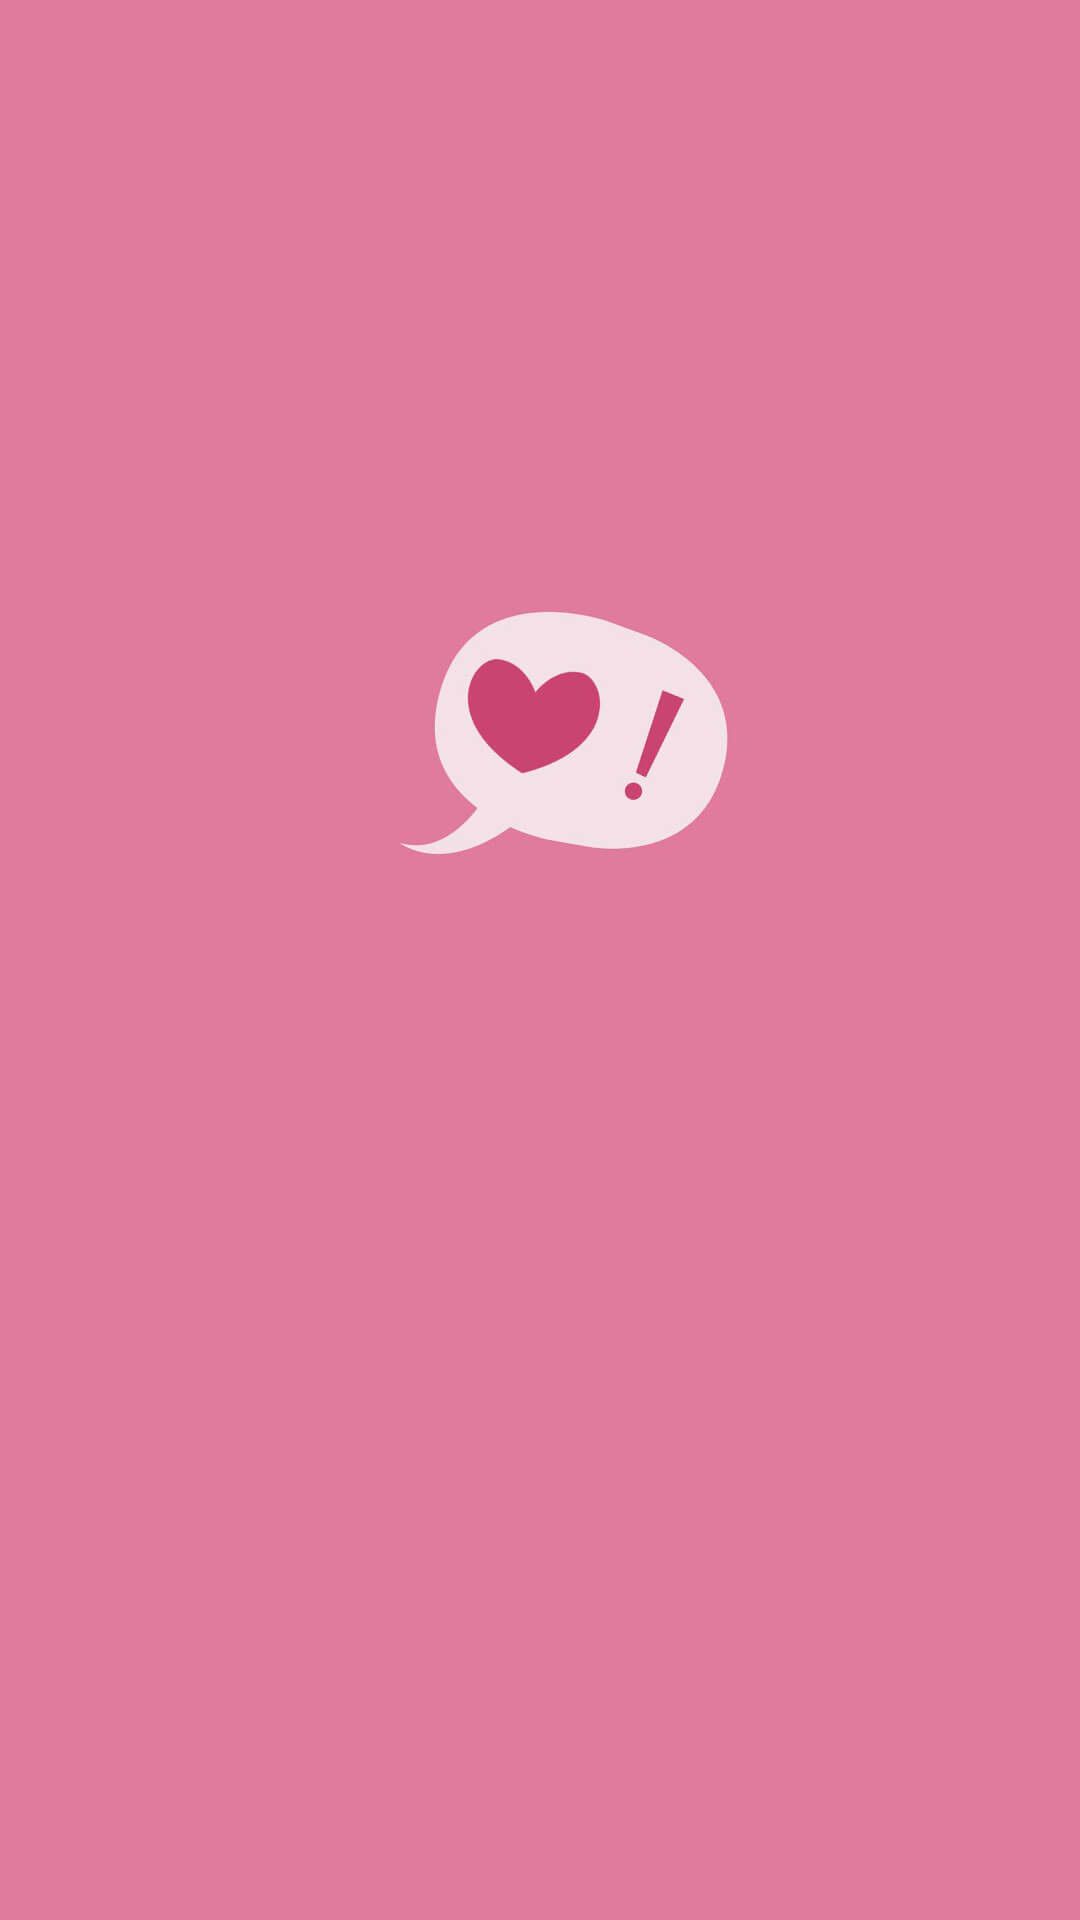  pink aesthetic tumblr laptop  android HD Photos  Wallpapers 115  Images  Page 8